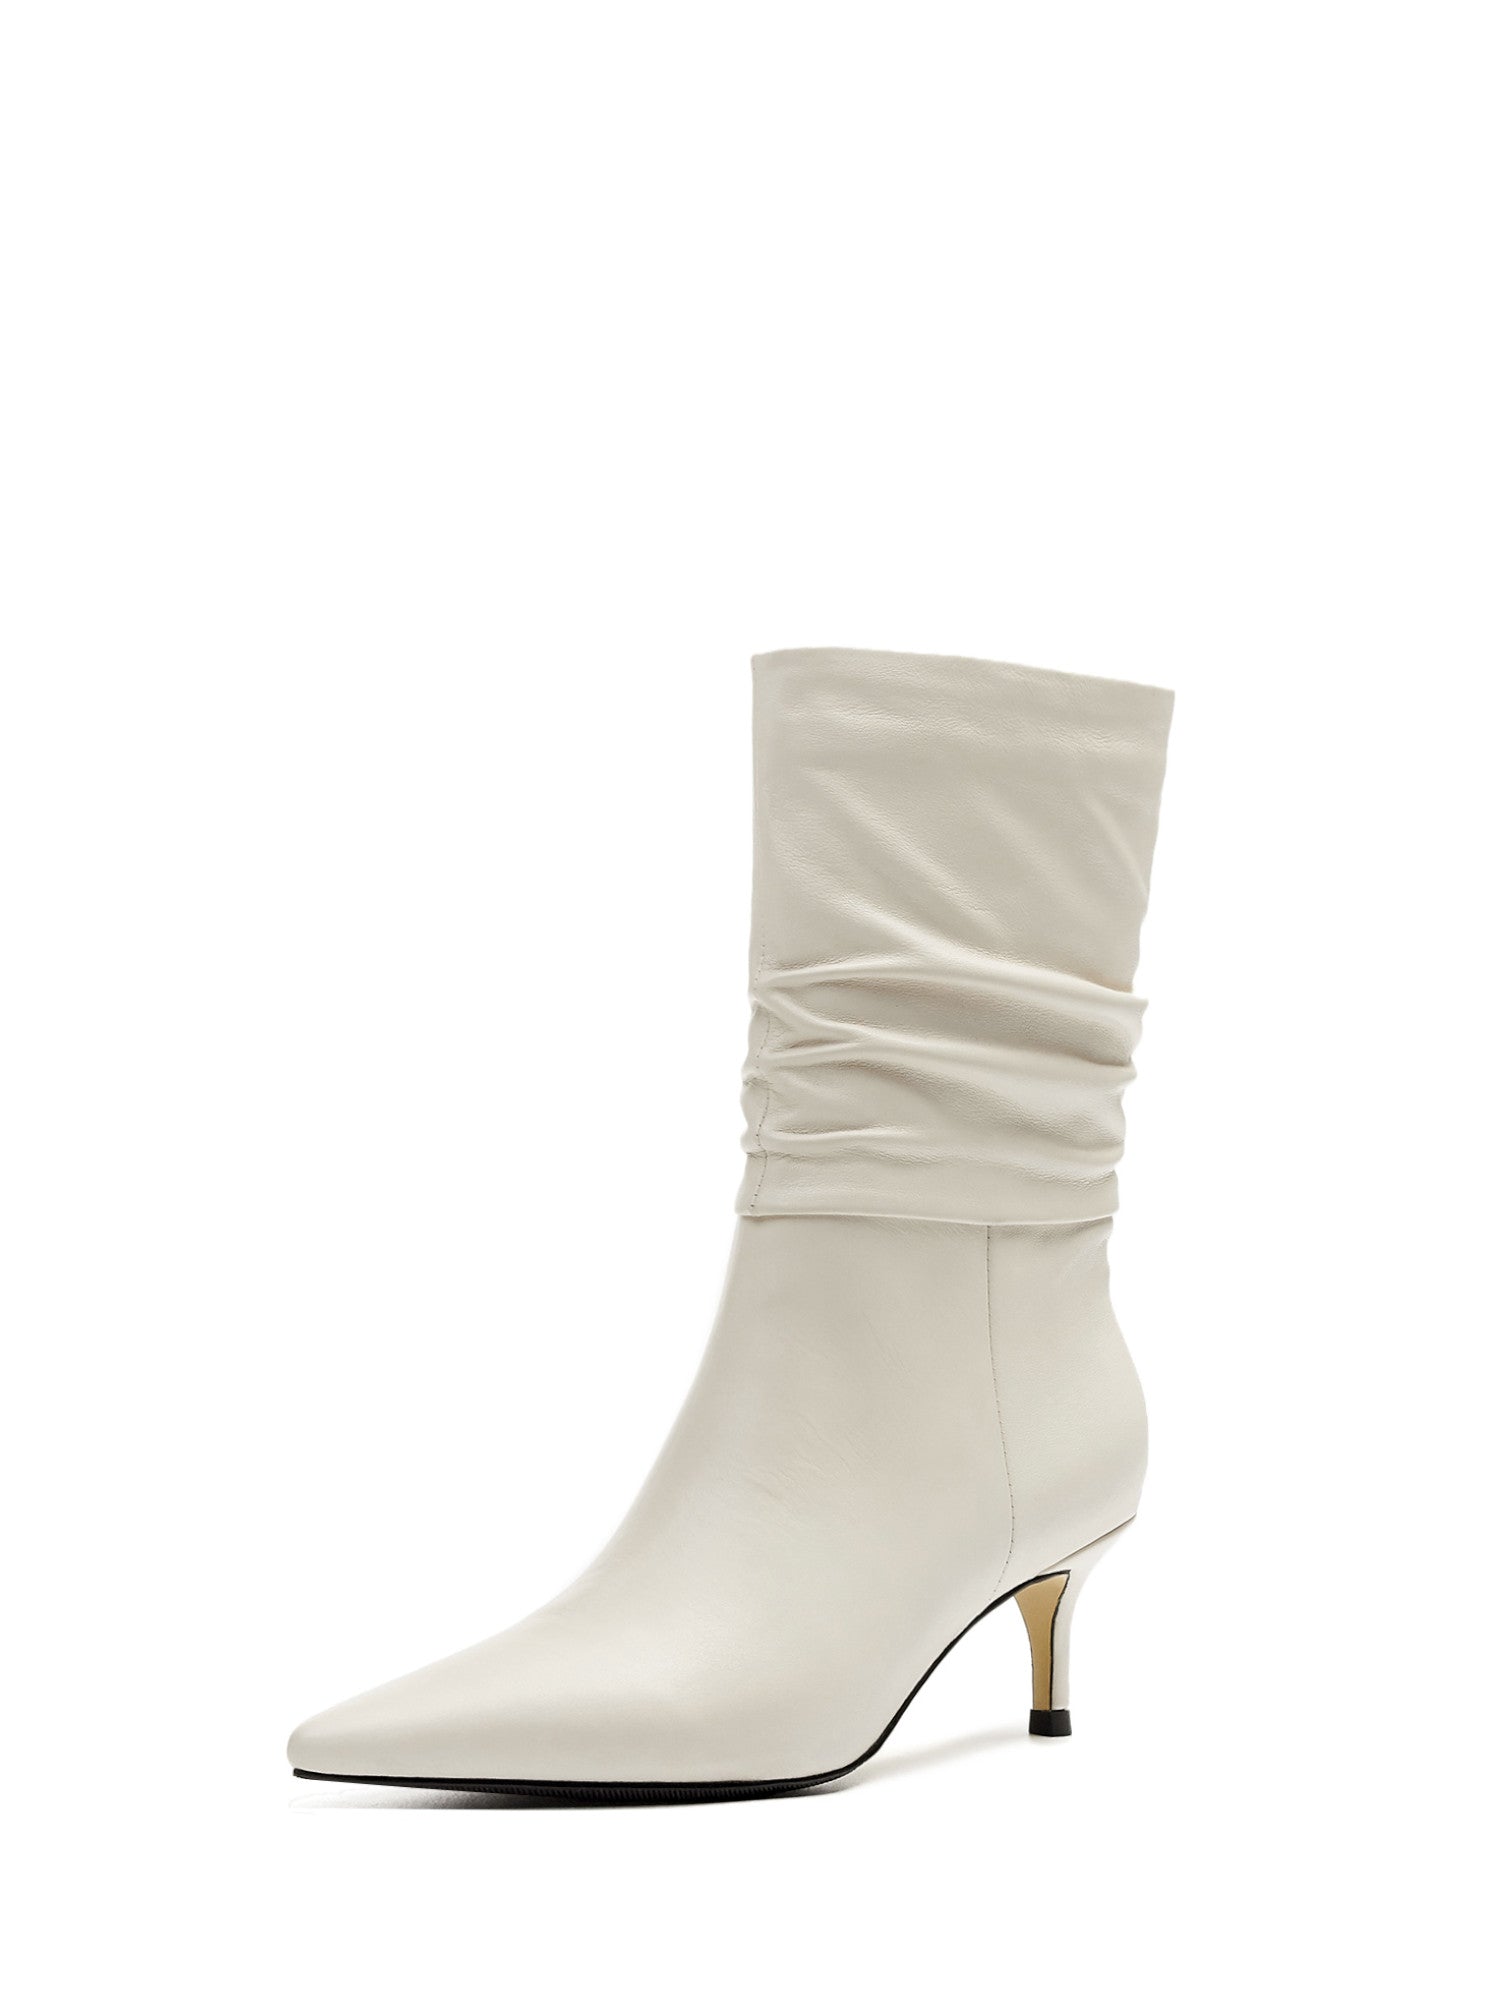 ROLISA-Milo-Slouchy-Ruched-Leather-Kitten-Heels-Mid-Calf-Boots-White